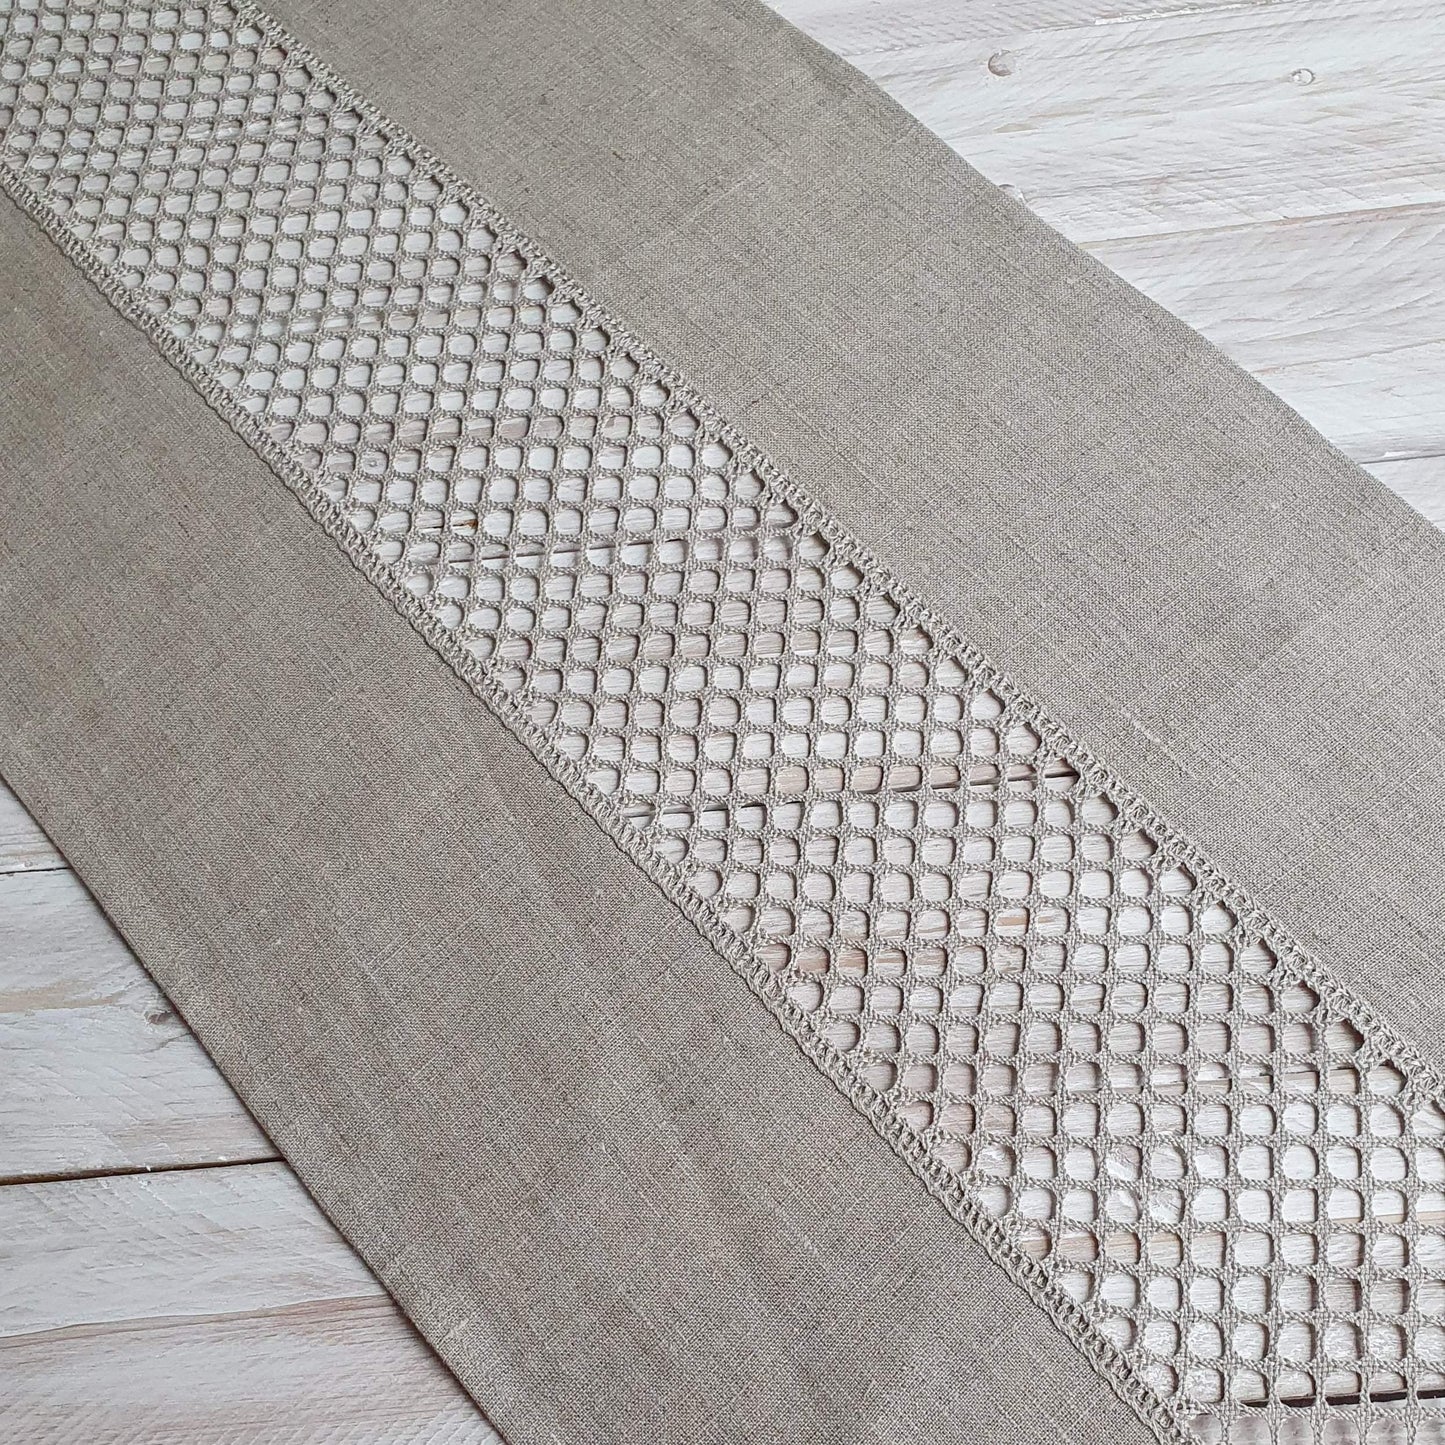 Table runner with lace EMMA - Linen4me